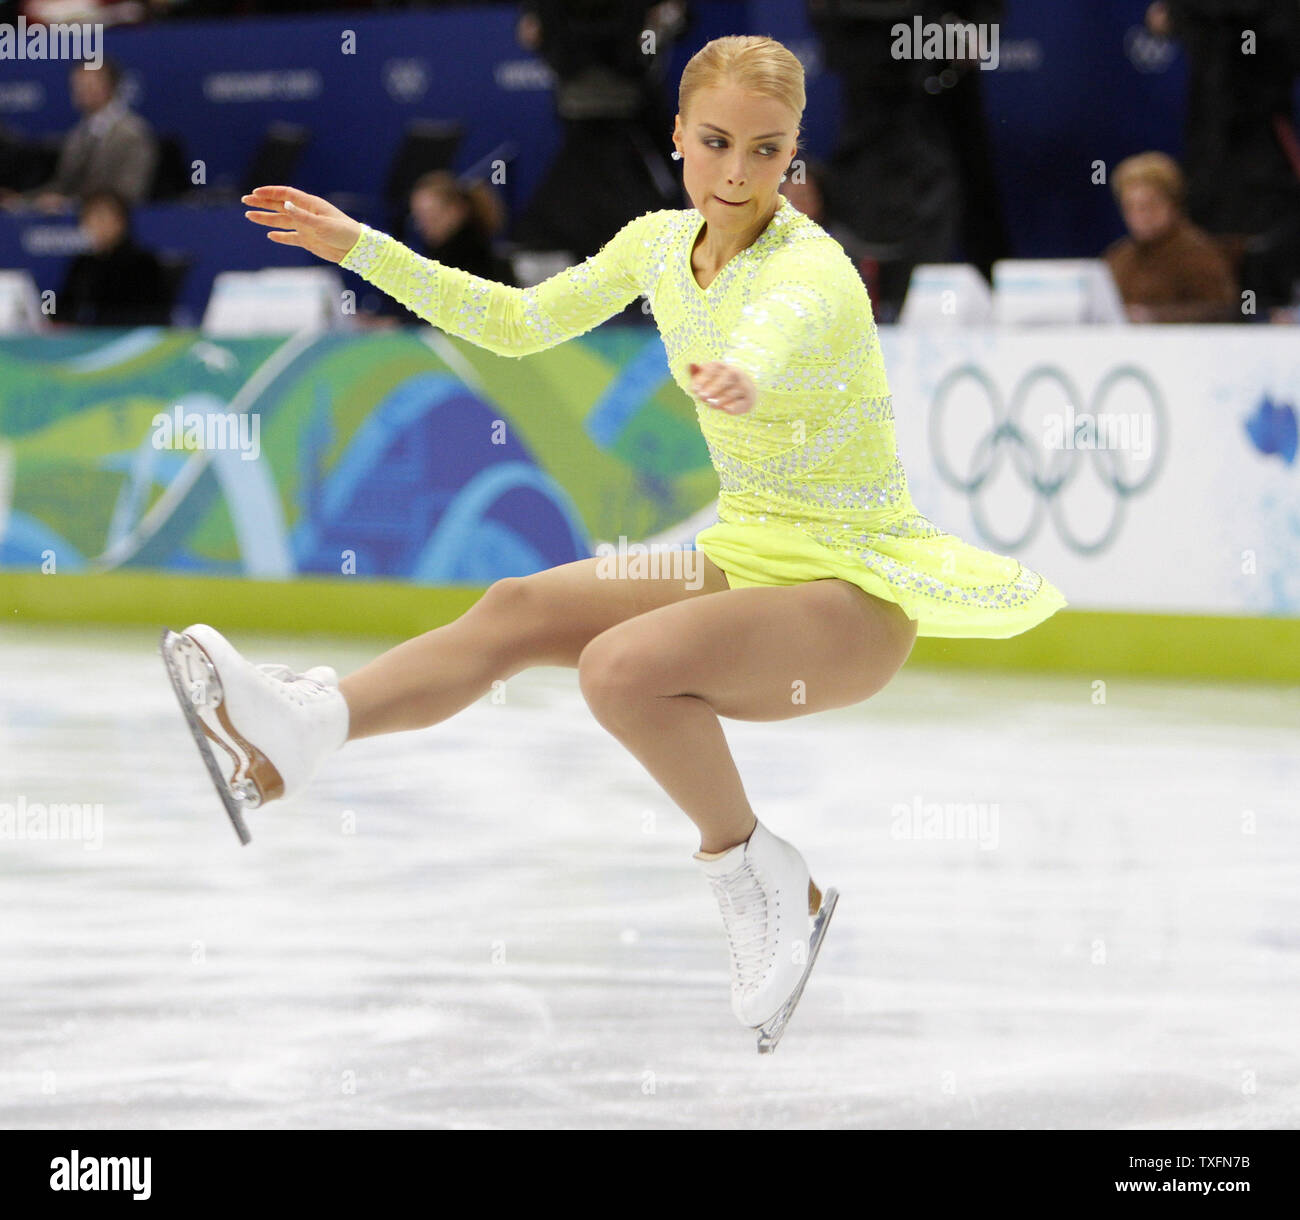 Kiira Korpi of Finland skates her short program in the women's figure competition at the 2010 Winter Olympics in Vancouver, Canada on February 23, 2010.     UPI/Brian Kersey Stock Photo